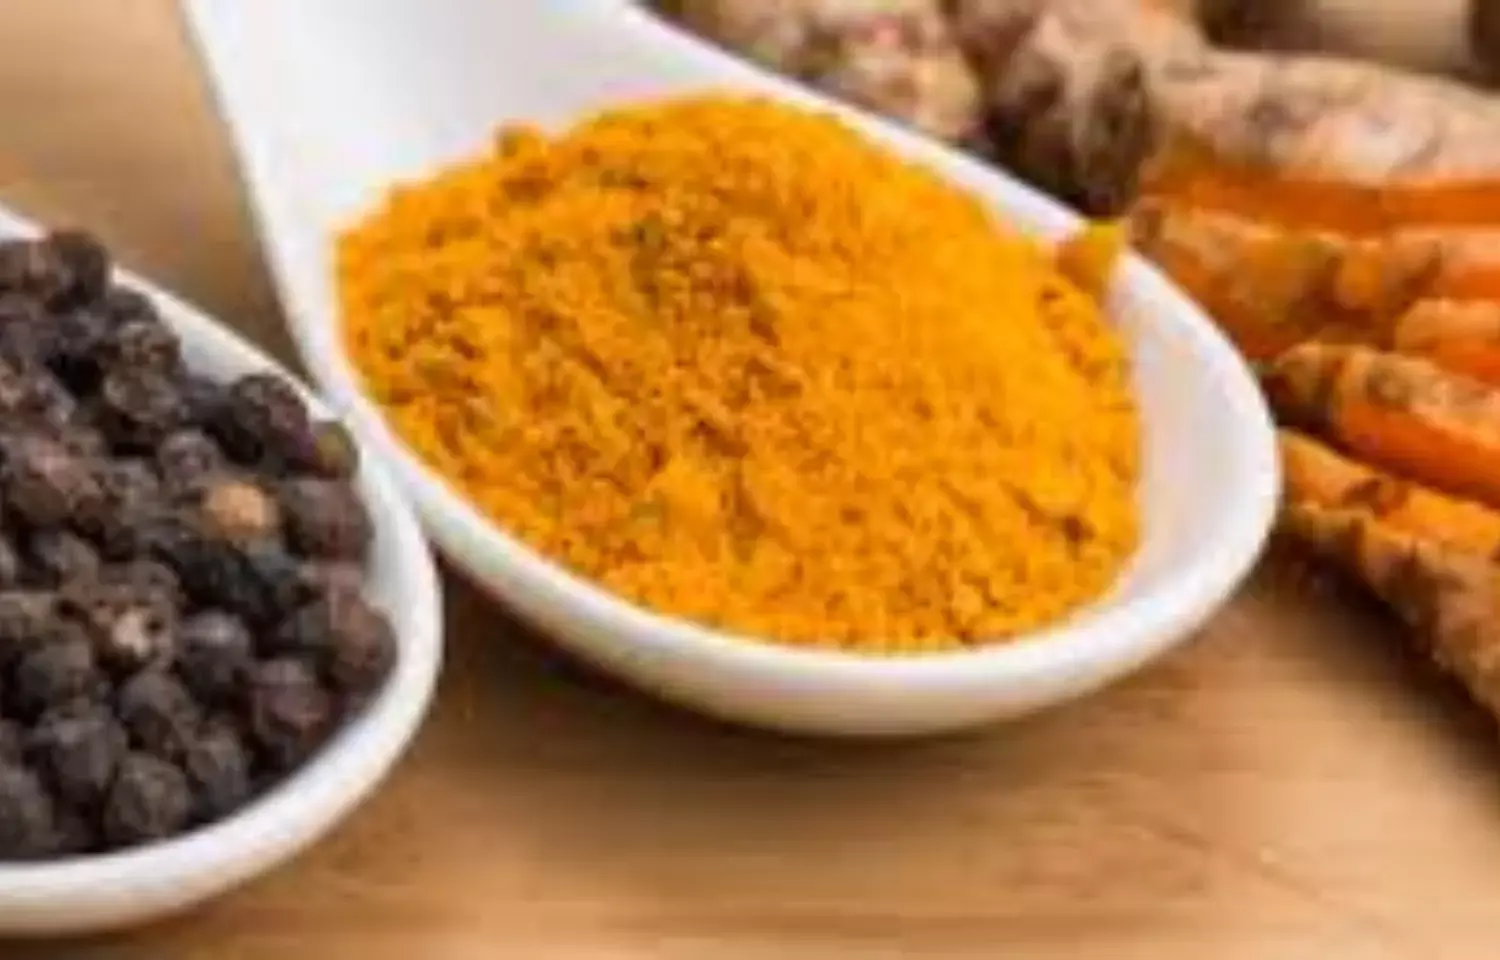 Curcumin-piperine co-supplementation significantly reduces weakness in COVID-19 patients